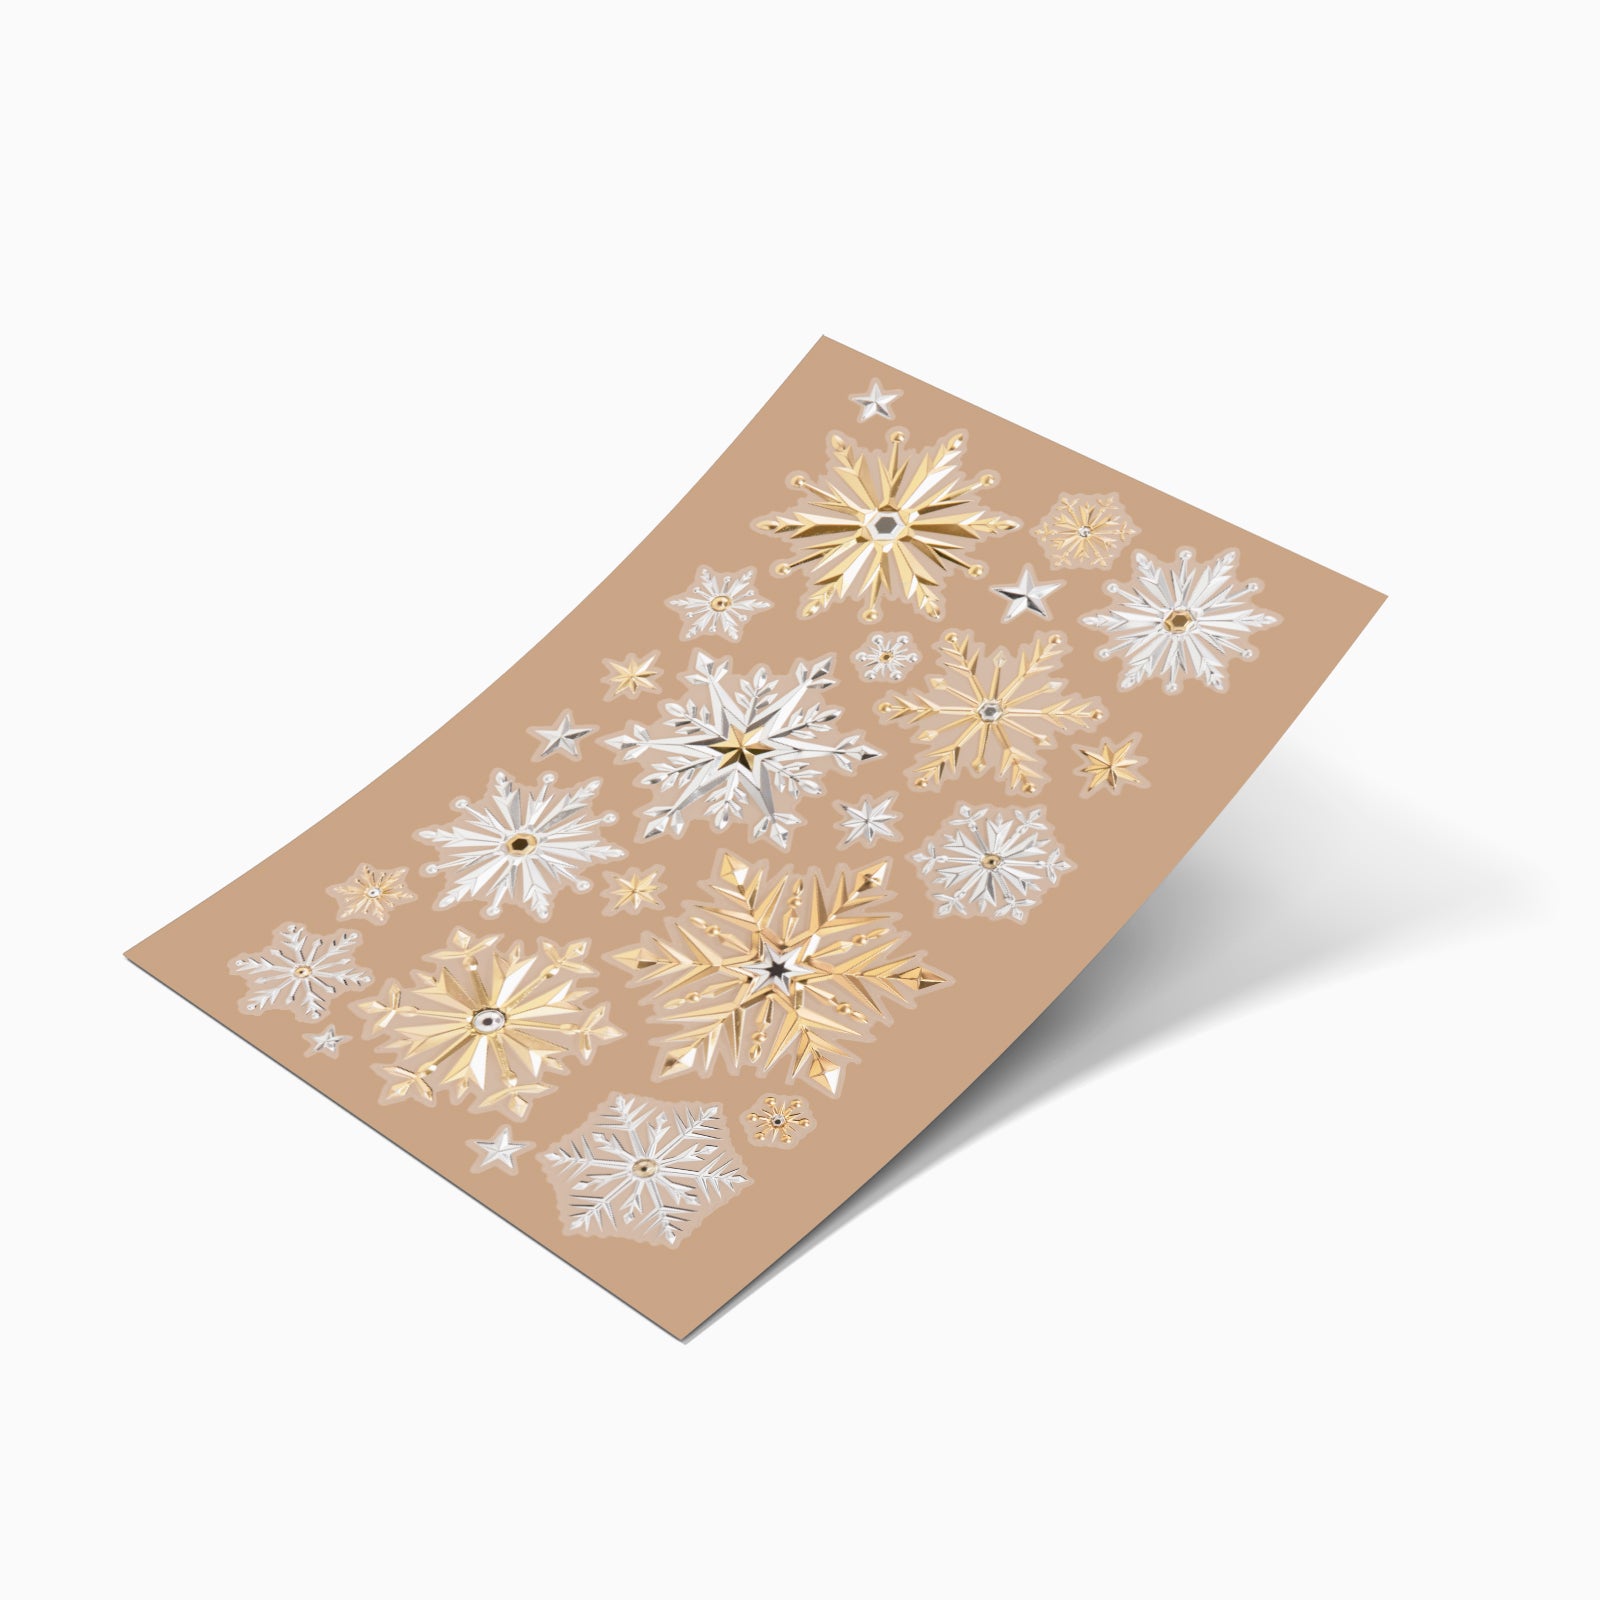 Gold and silver snowflake flakes featins